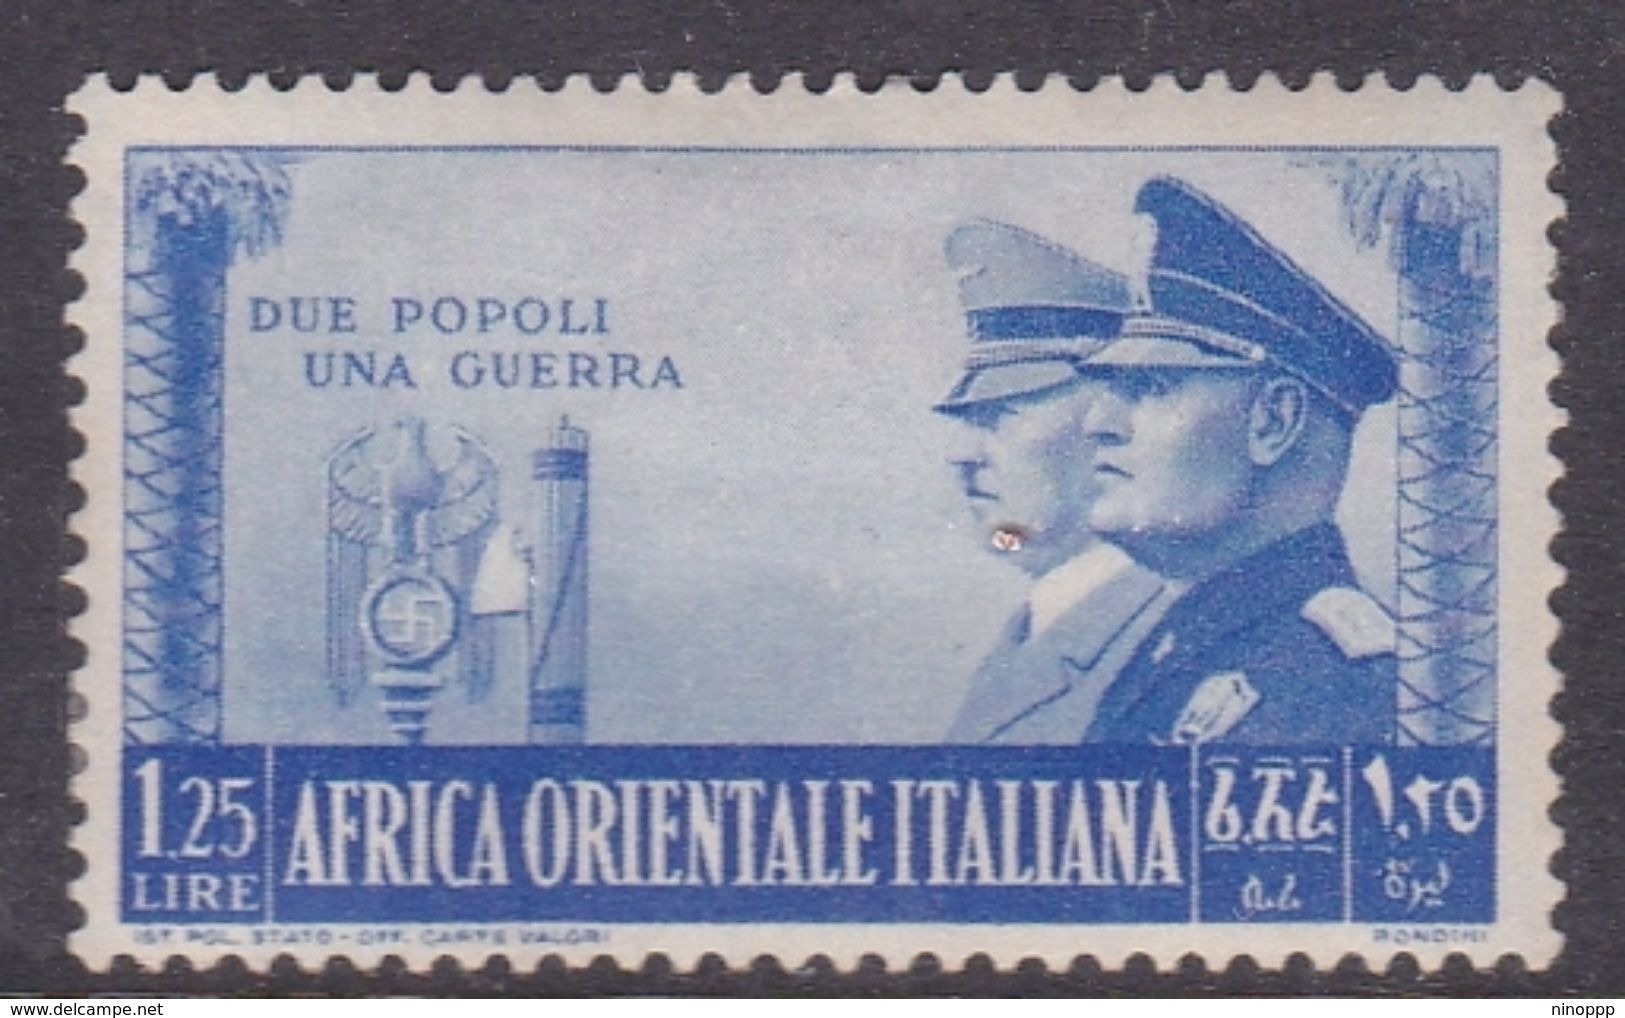 Italy-Colonies And Territories-Italian Eastern Africa S40 1941 Two Peoples One War 1,25 Lira Bright Ultra MH - Emissions Générales